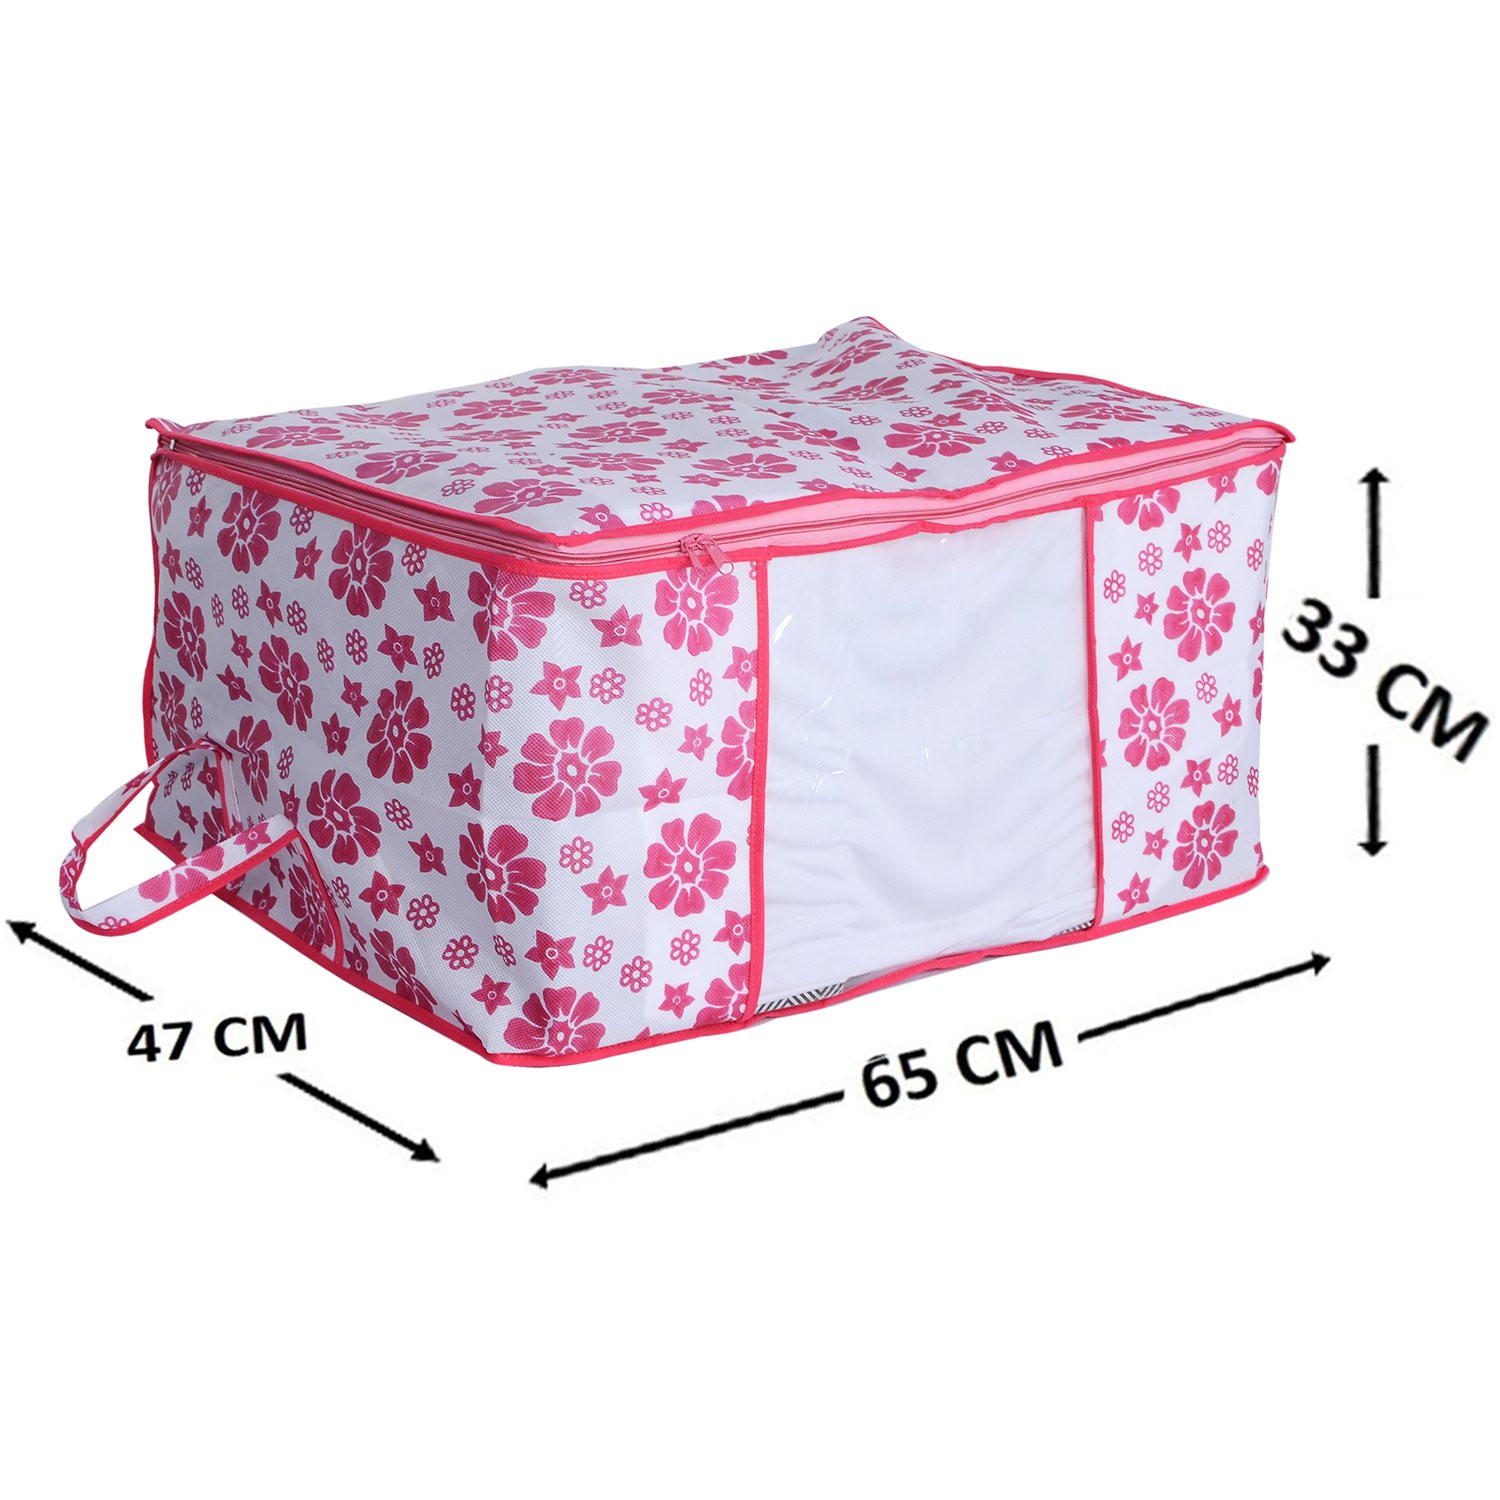 Kuber Industries Flower Printed Non Woven Saree Cover And Underbed Storage Bag, Cloth Organizer For Storage, Blanket Cover Combo Set (Pink) -CTKTC38607